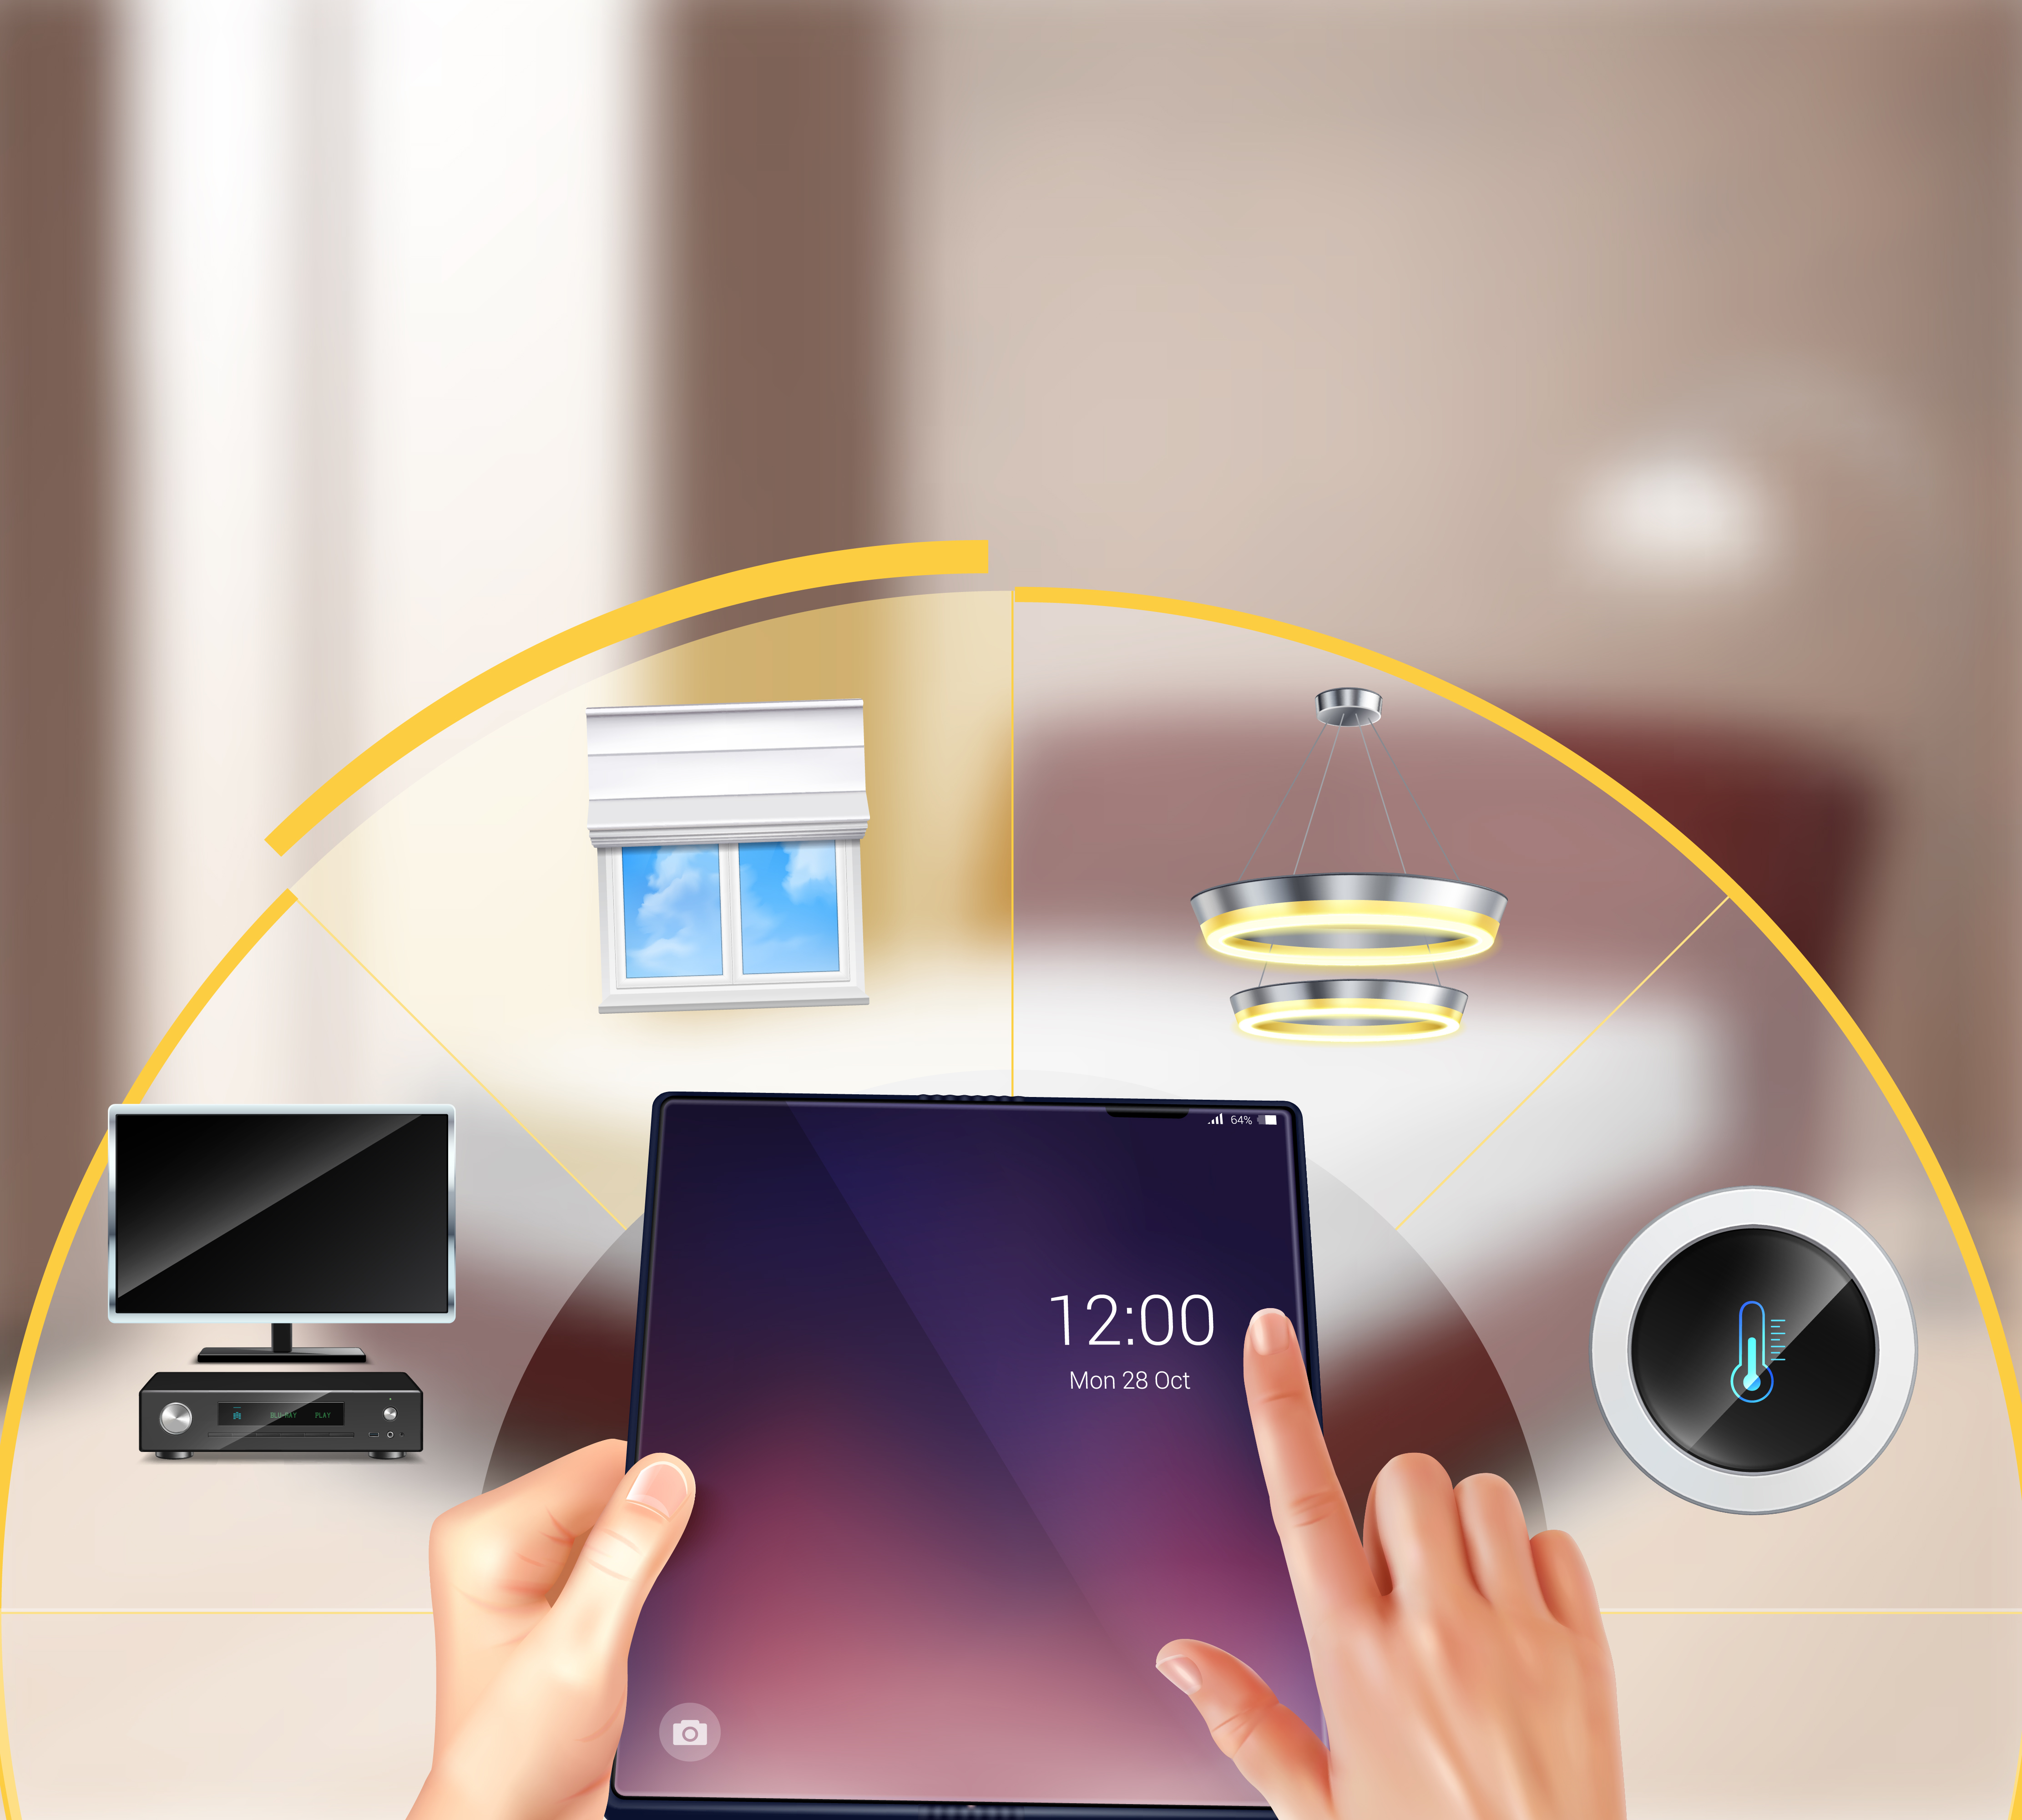 iot systems for smart homes